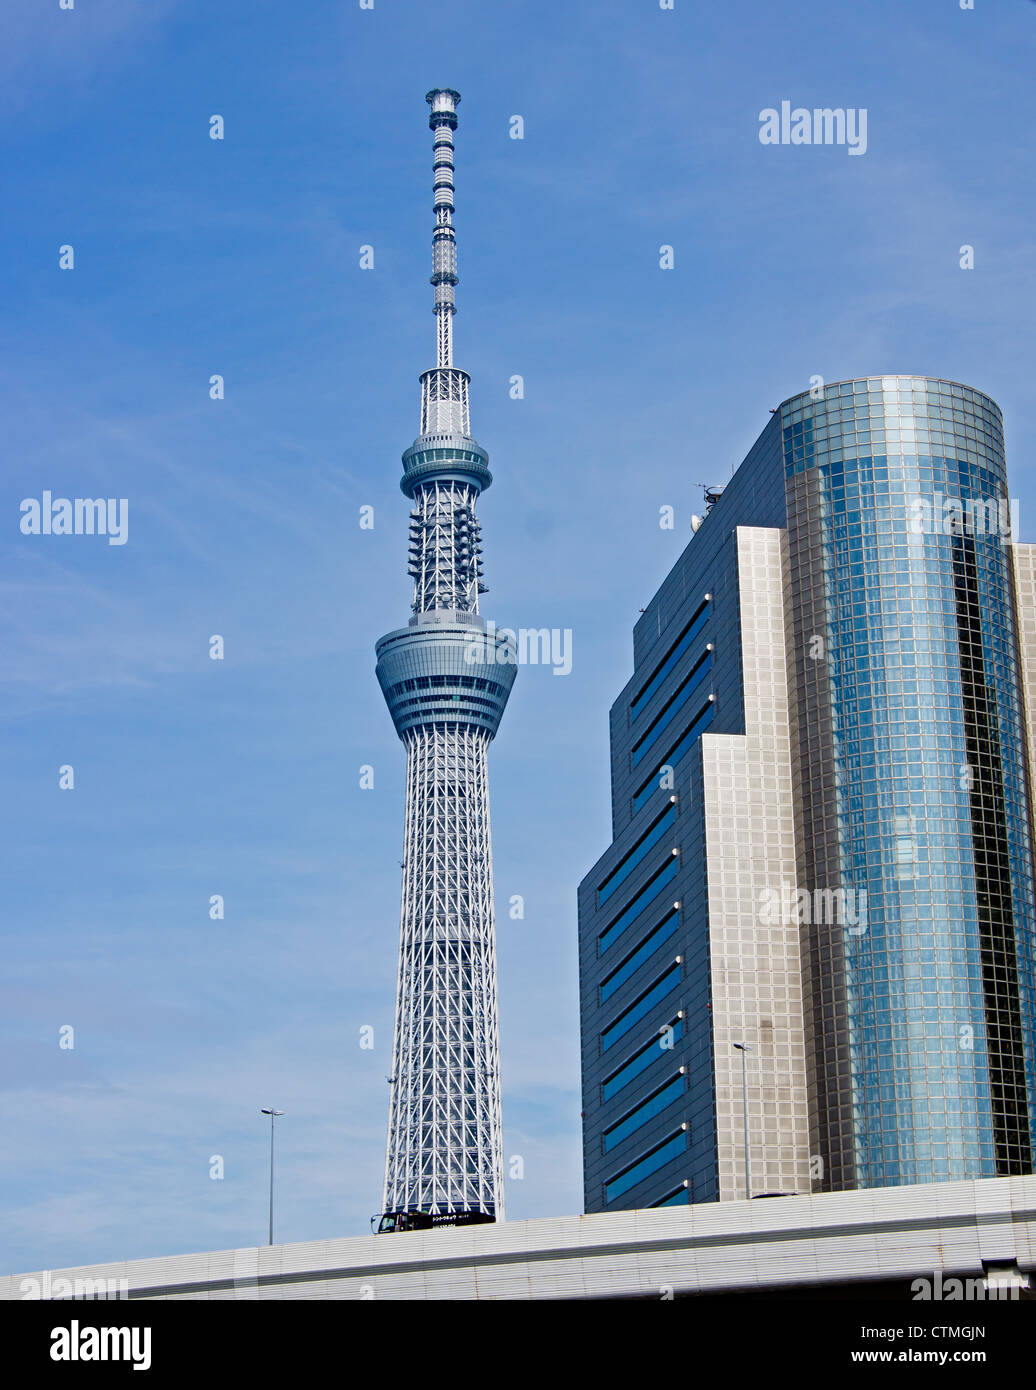 A view of Tokyo's Skytree tower Stock Photo